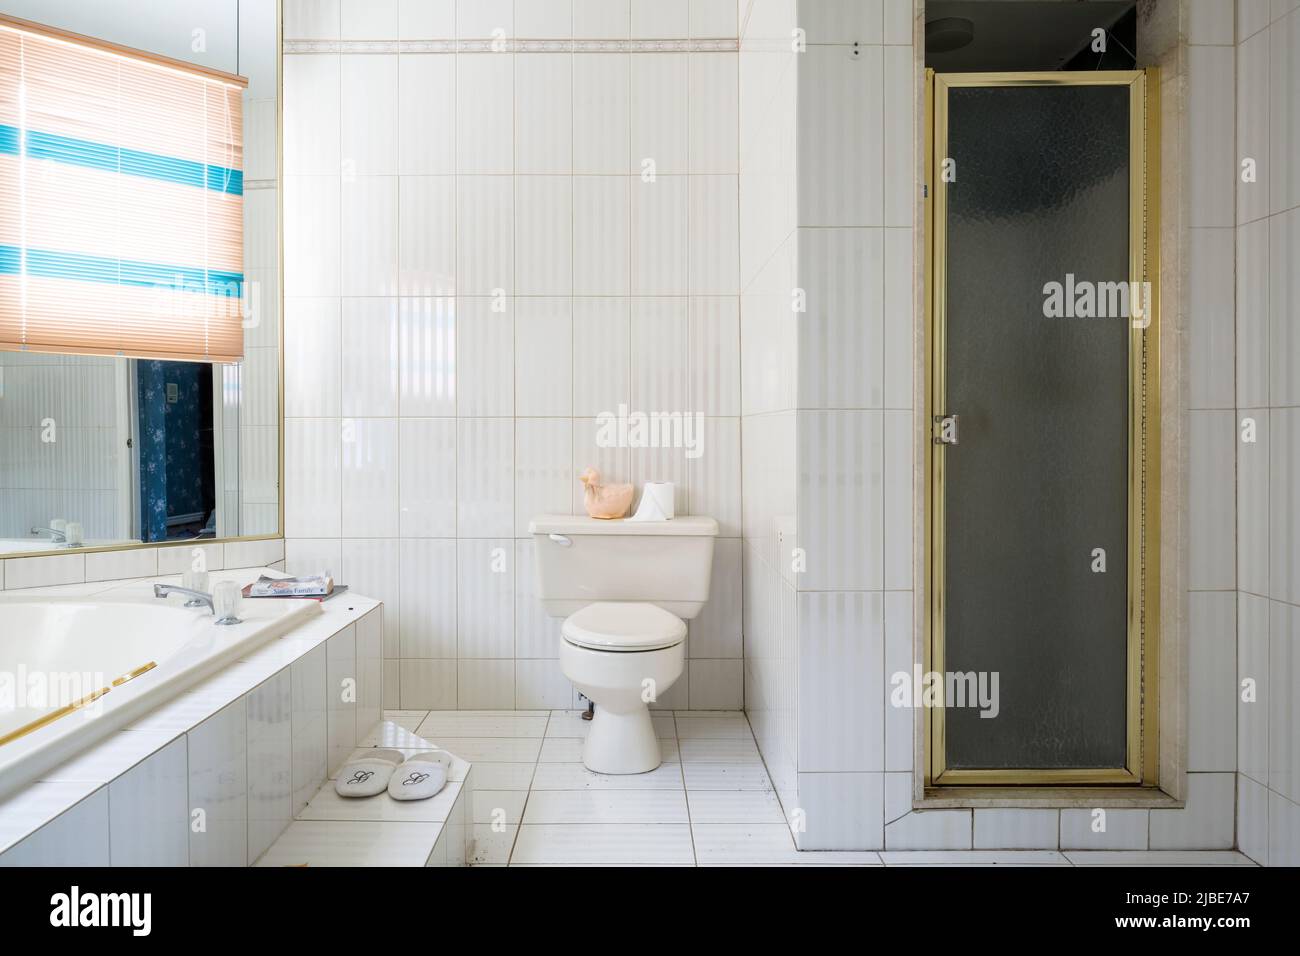 A 1980s designed bathroom inside an abandoned home. This house has since been demolished. Stock Photo